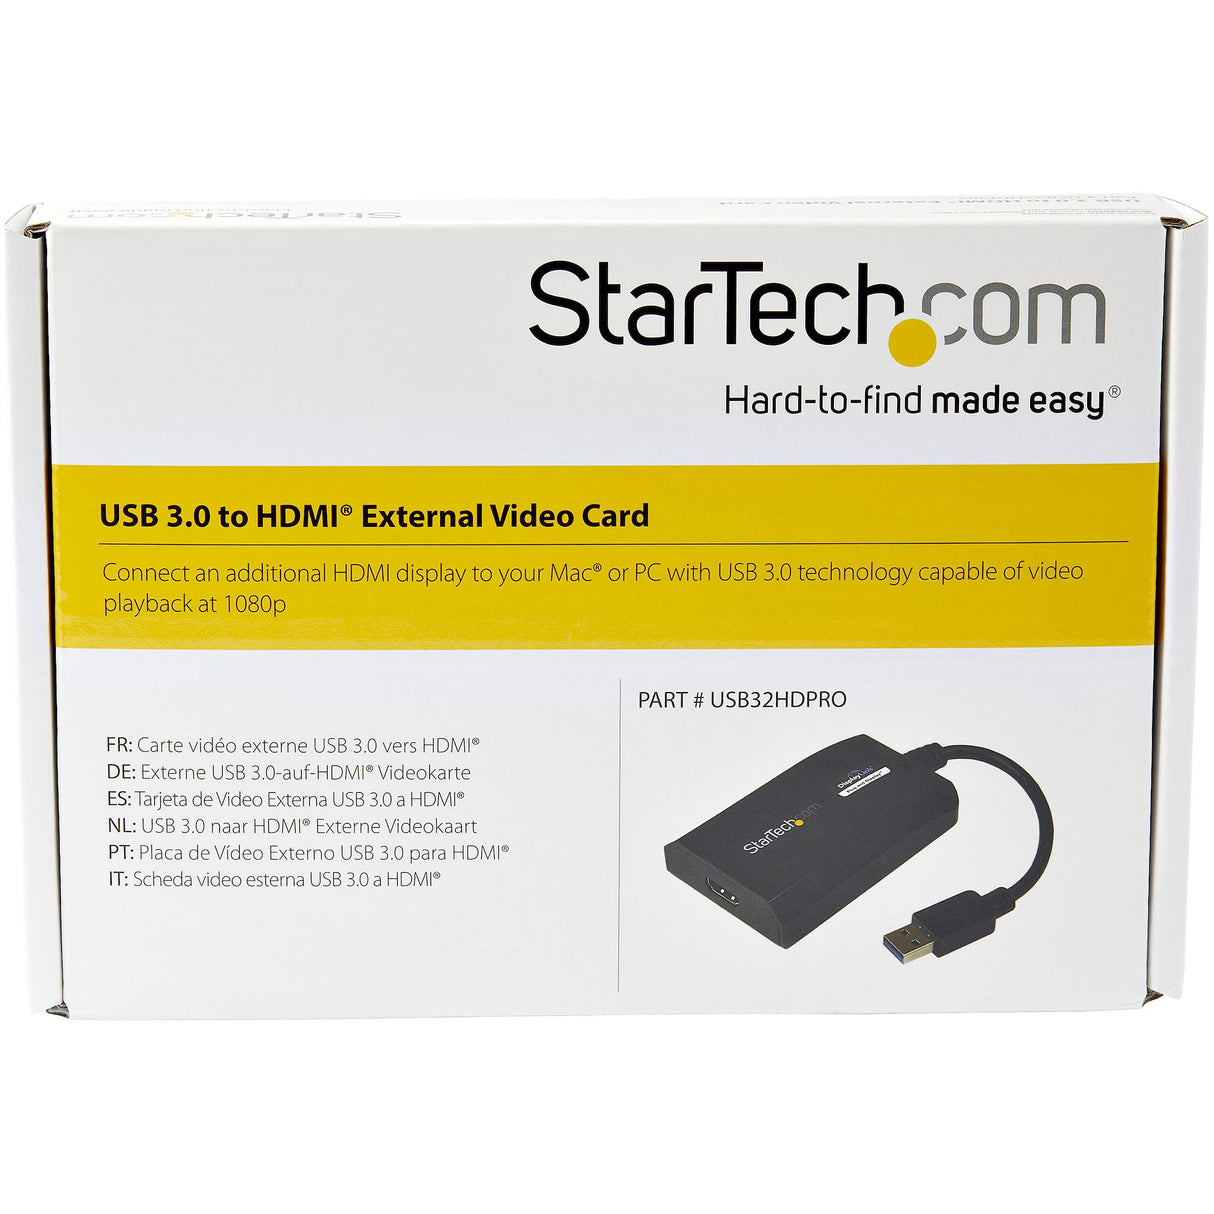 STARTECH USB 3.0 to HDMI Adapter - DisplayLink Certified - 1080p (1920x1200) - USB Type-A to HDMI Display Adapter Converter for Monitor - External Video & Graphics Card | Windows|Mac (USB32HDPRO) (USB32HDPRO)